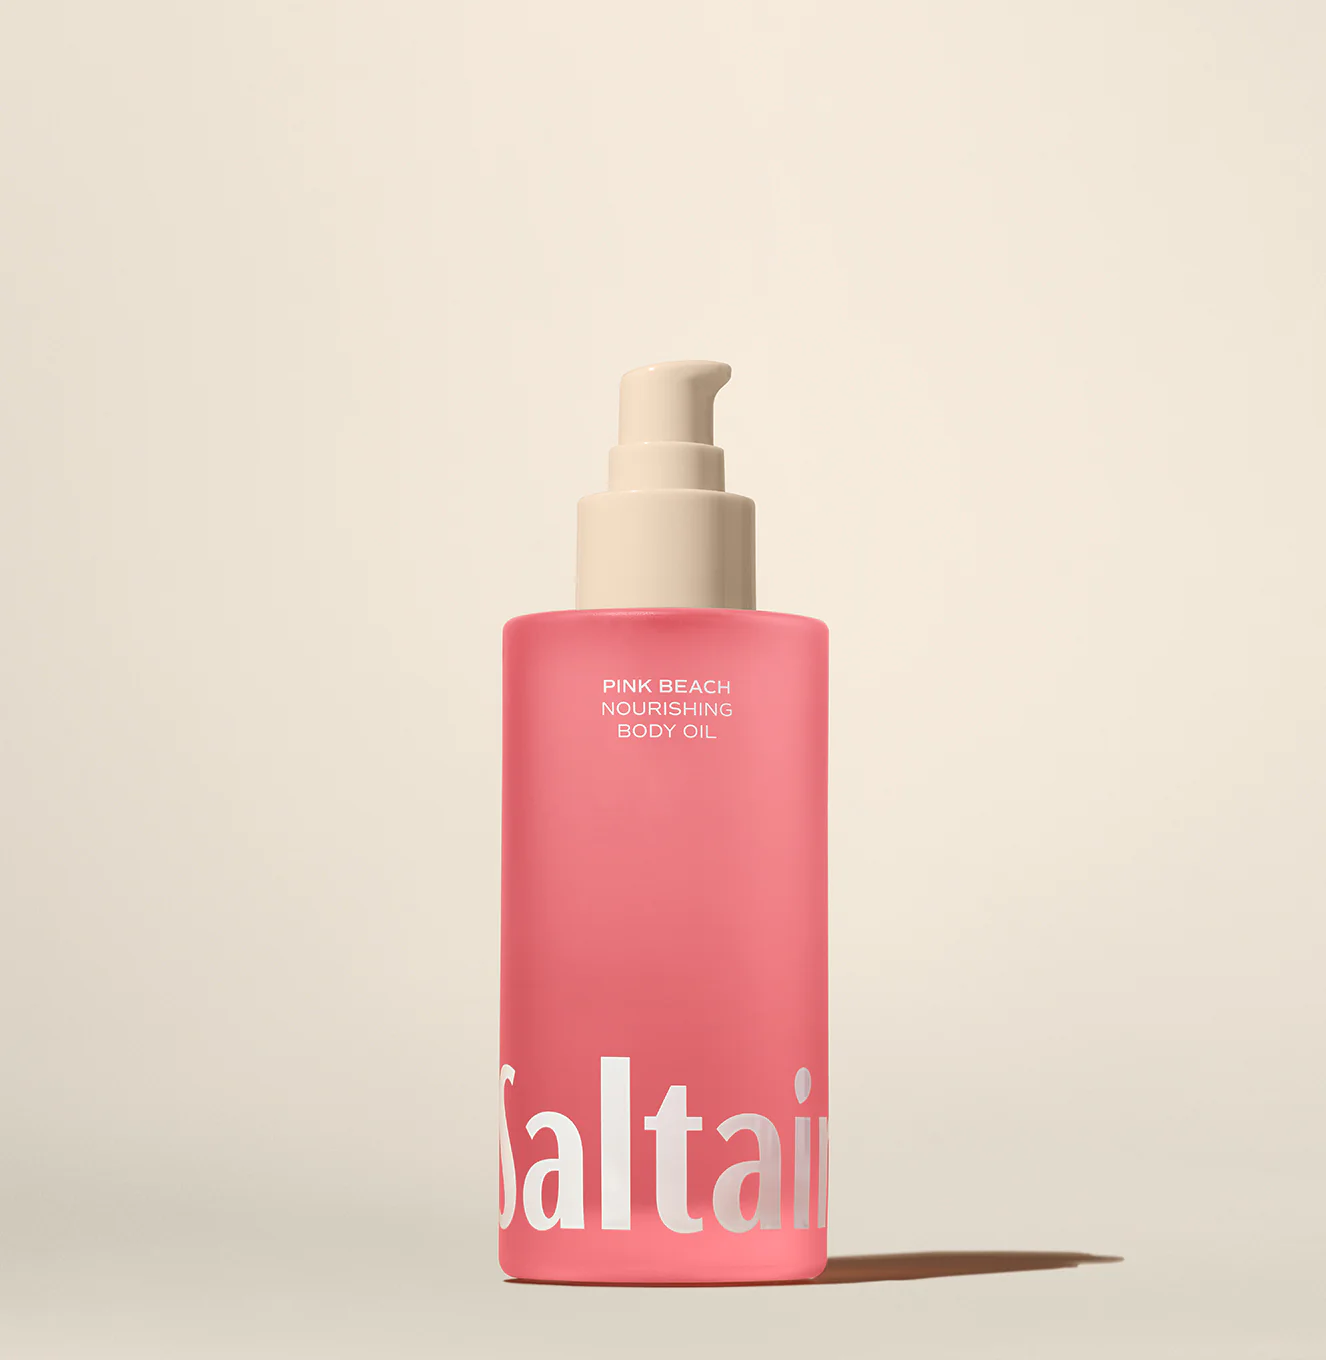 You are currently viewing Saltair Body Oil Reviews: Is It Worth Your Money?